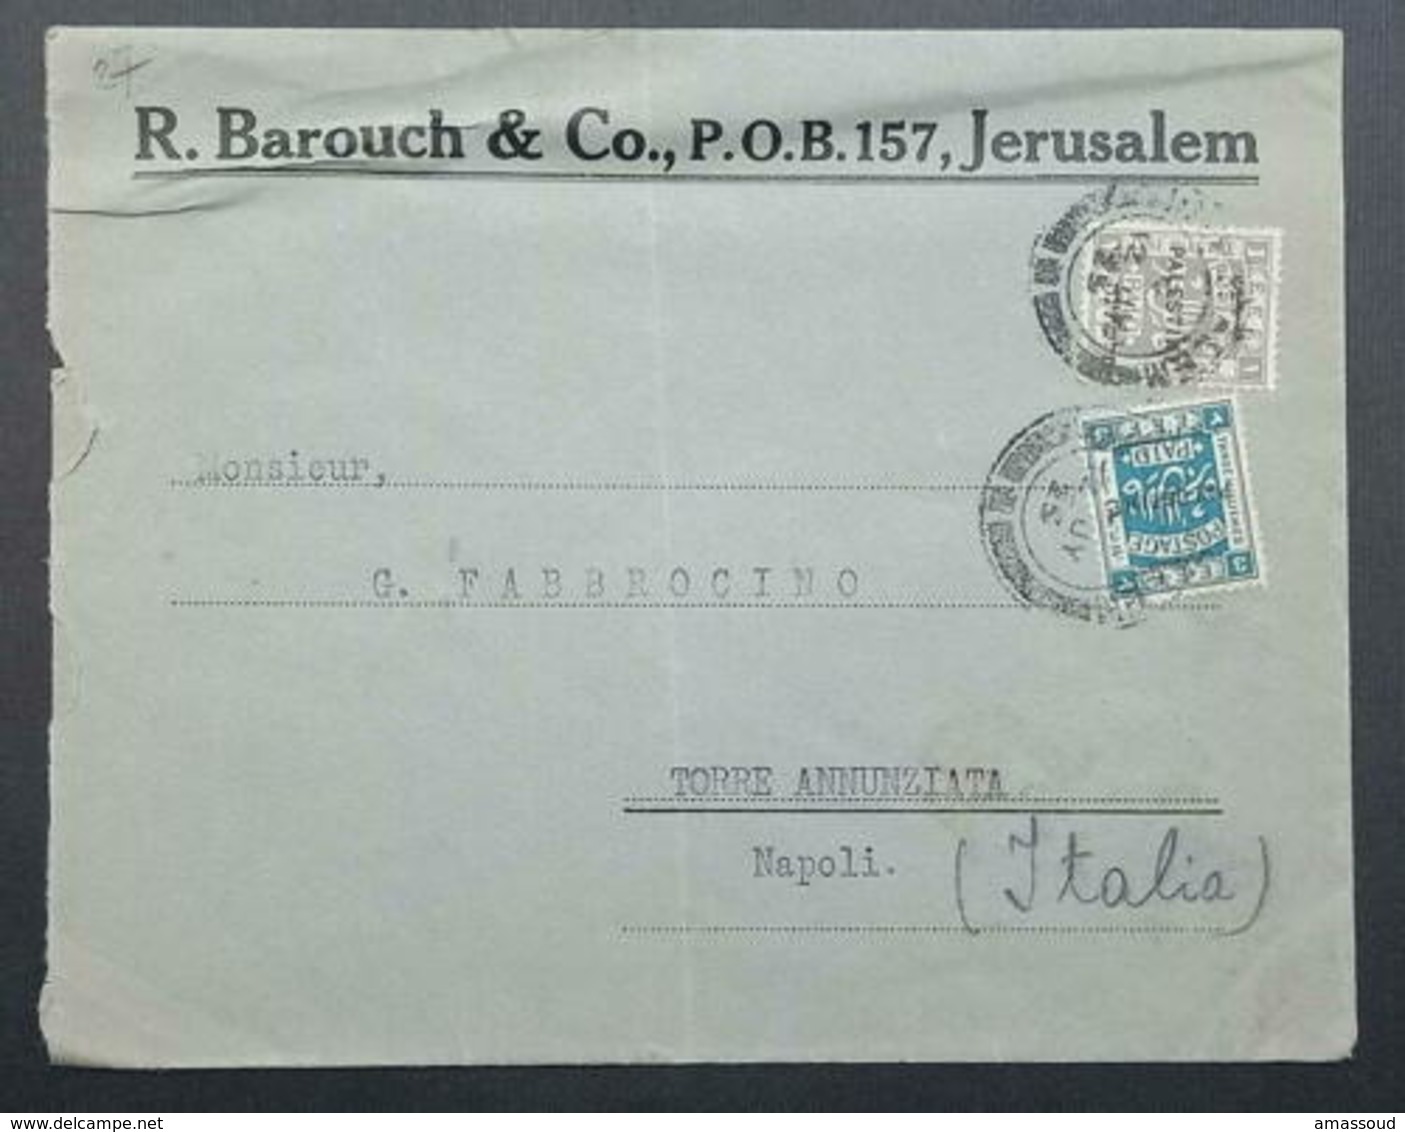 Palestine Jerusalem 113m Pictorial Surcharge 1925 Italy R. Barouch & Co. - Palestine